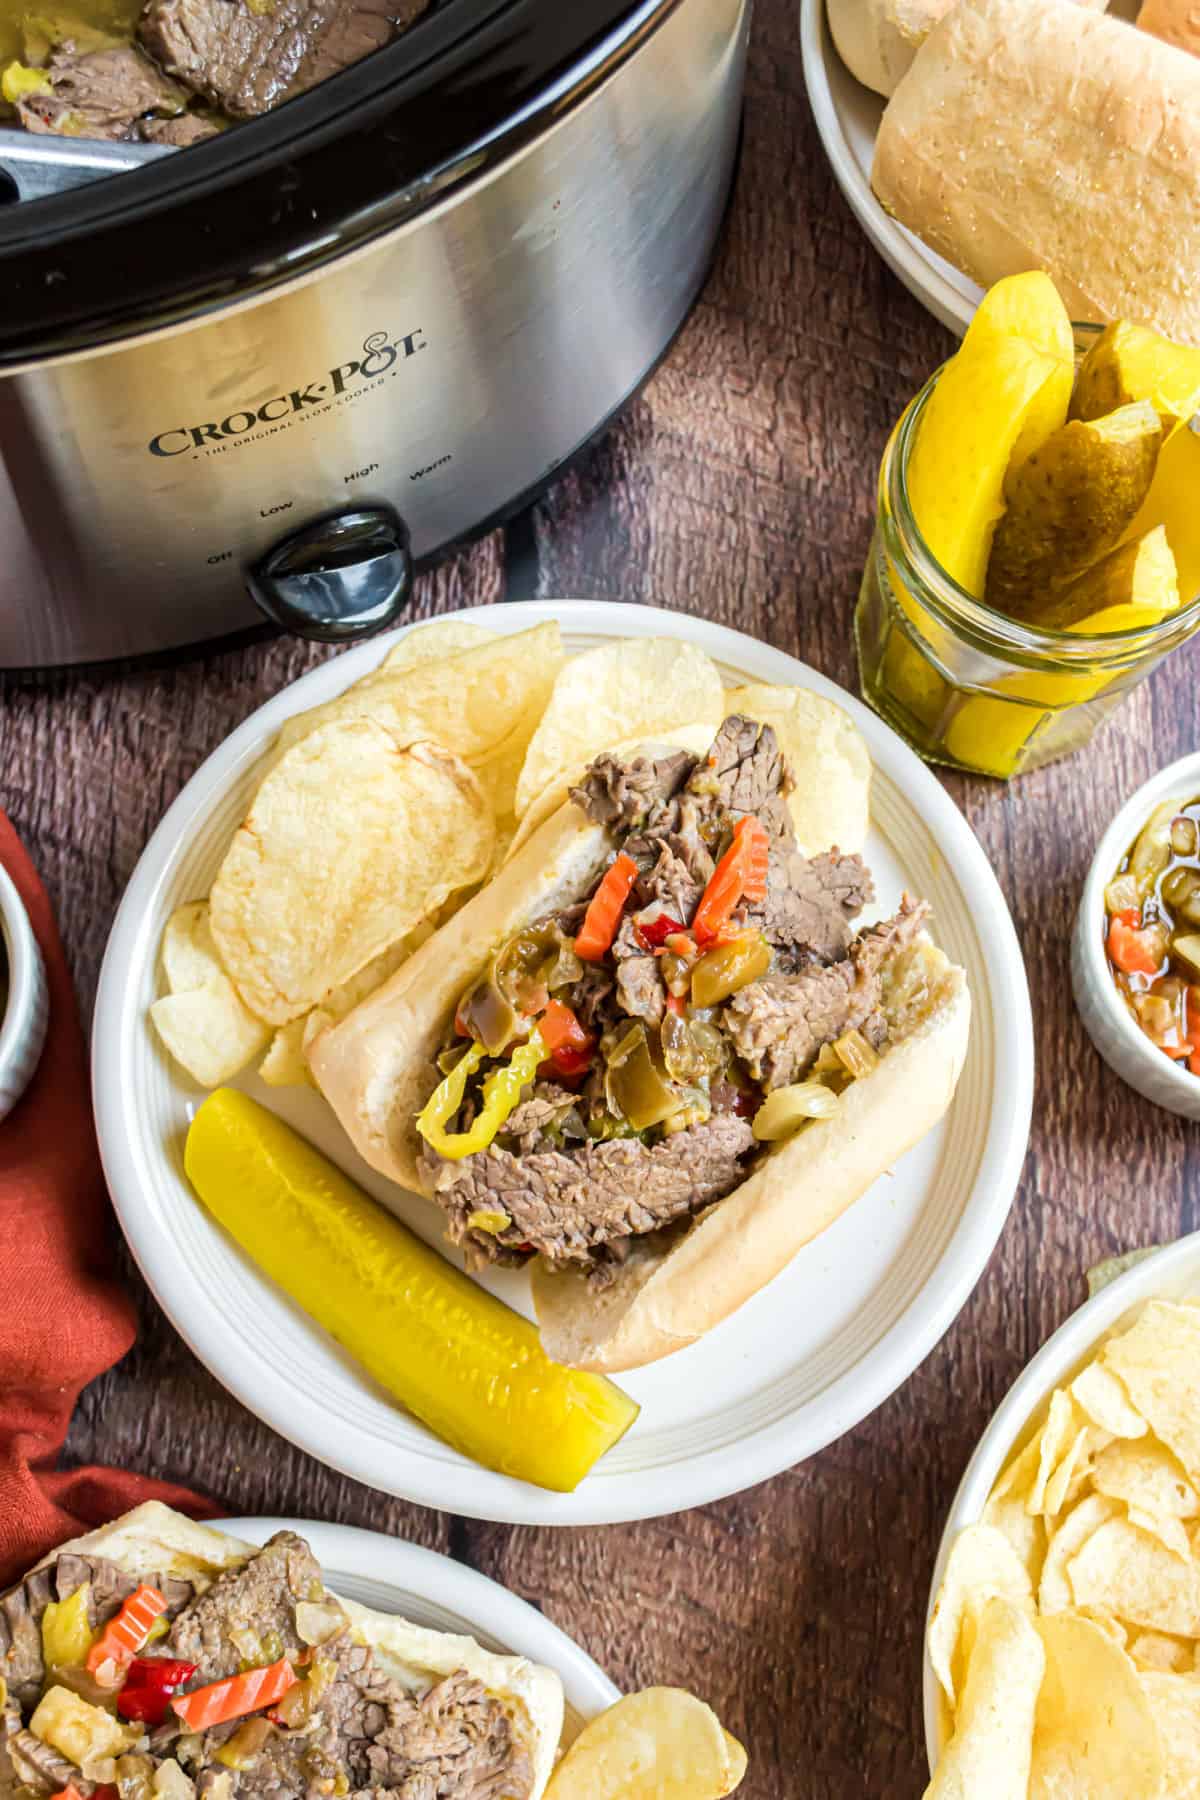 Italian beef sandwich on a plate with potato chips.